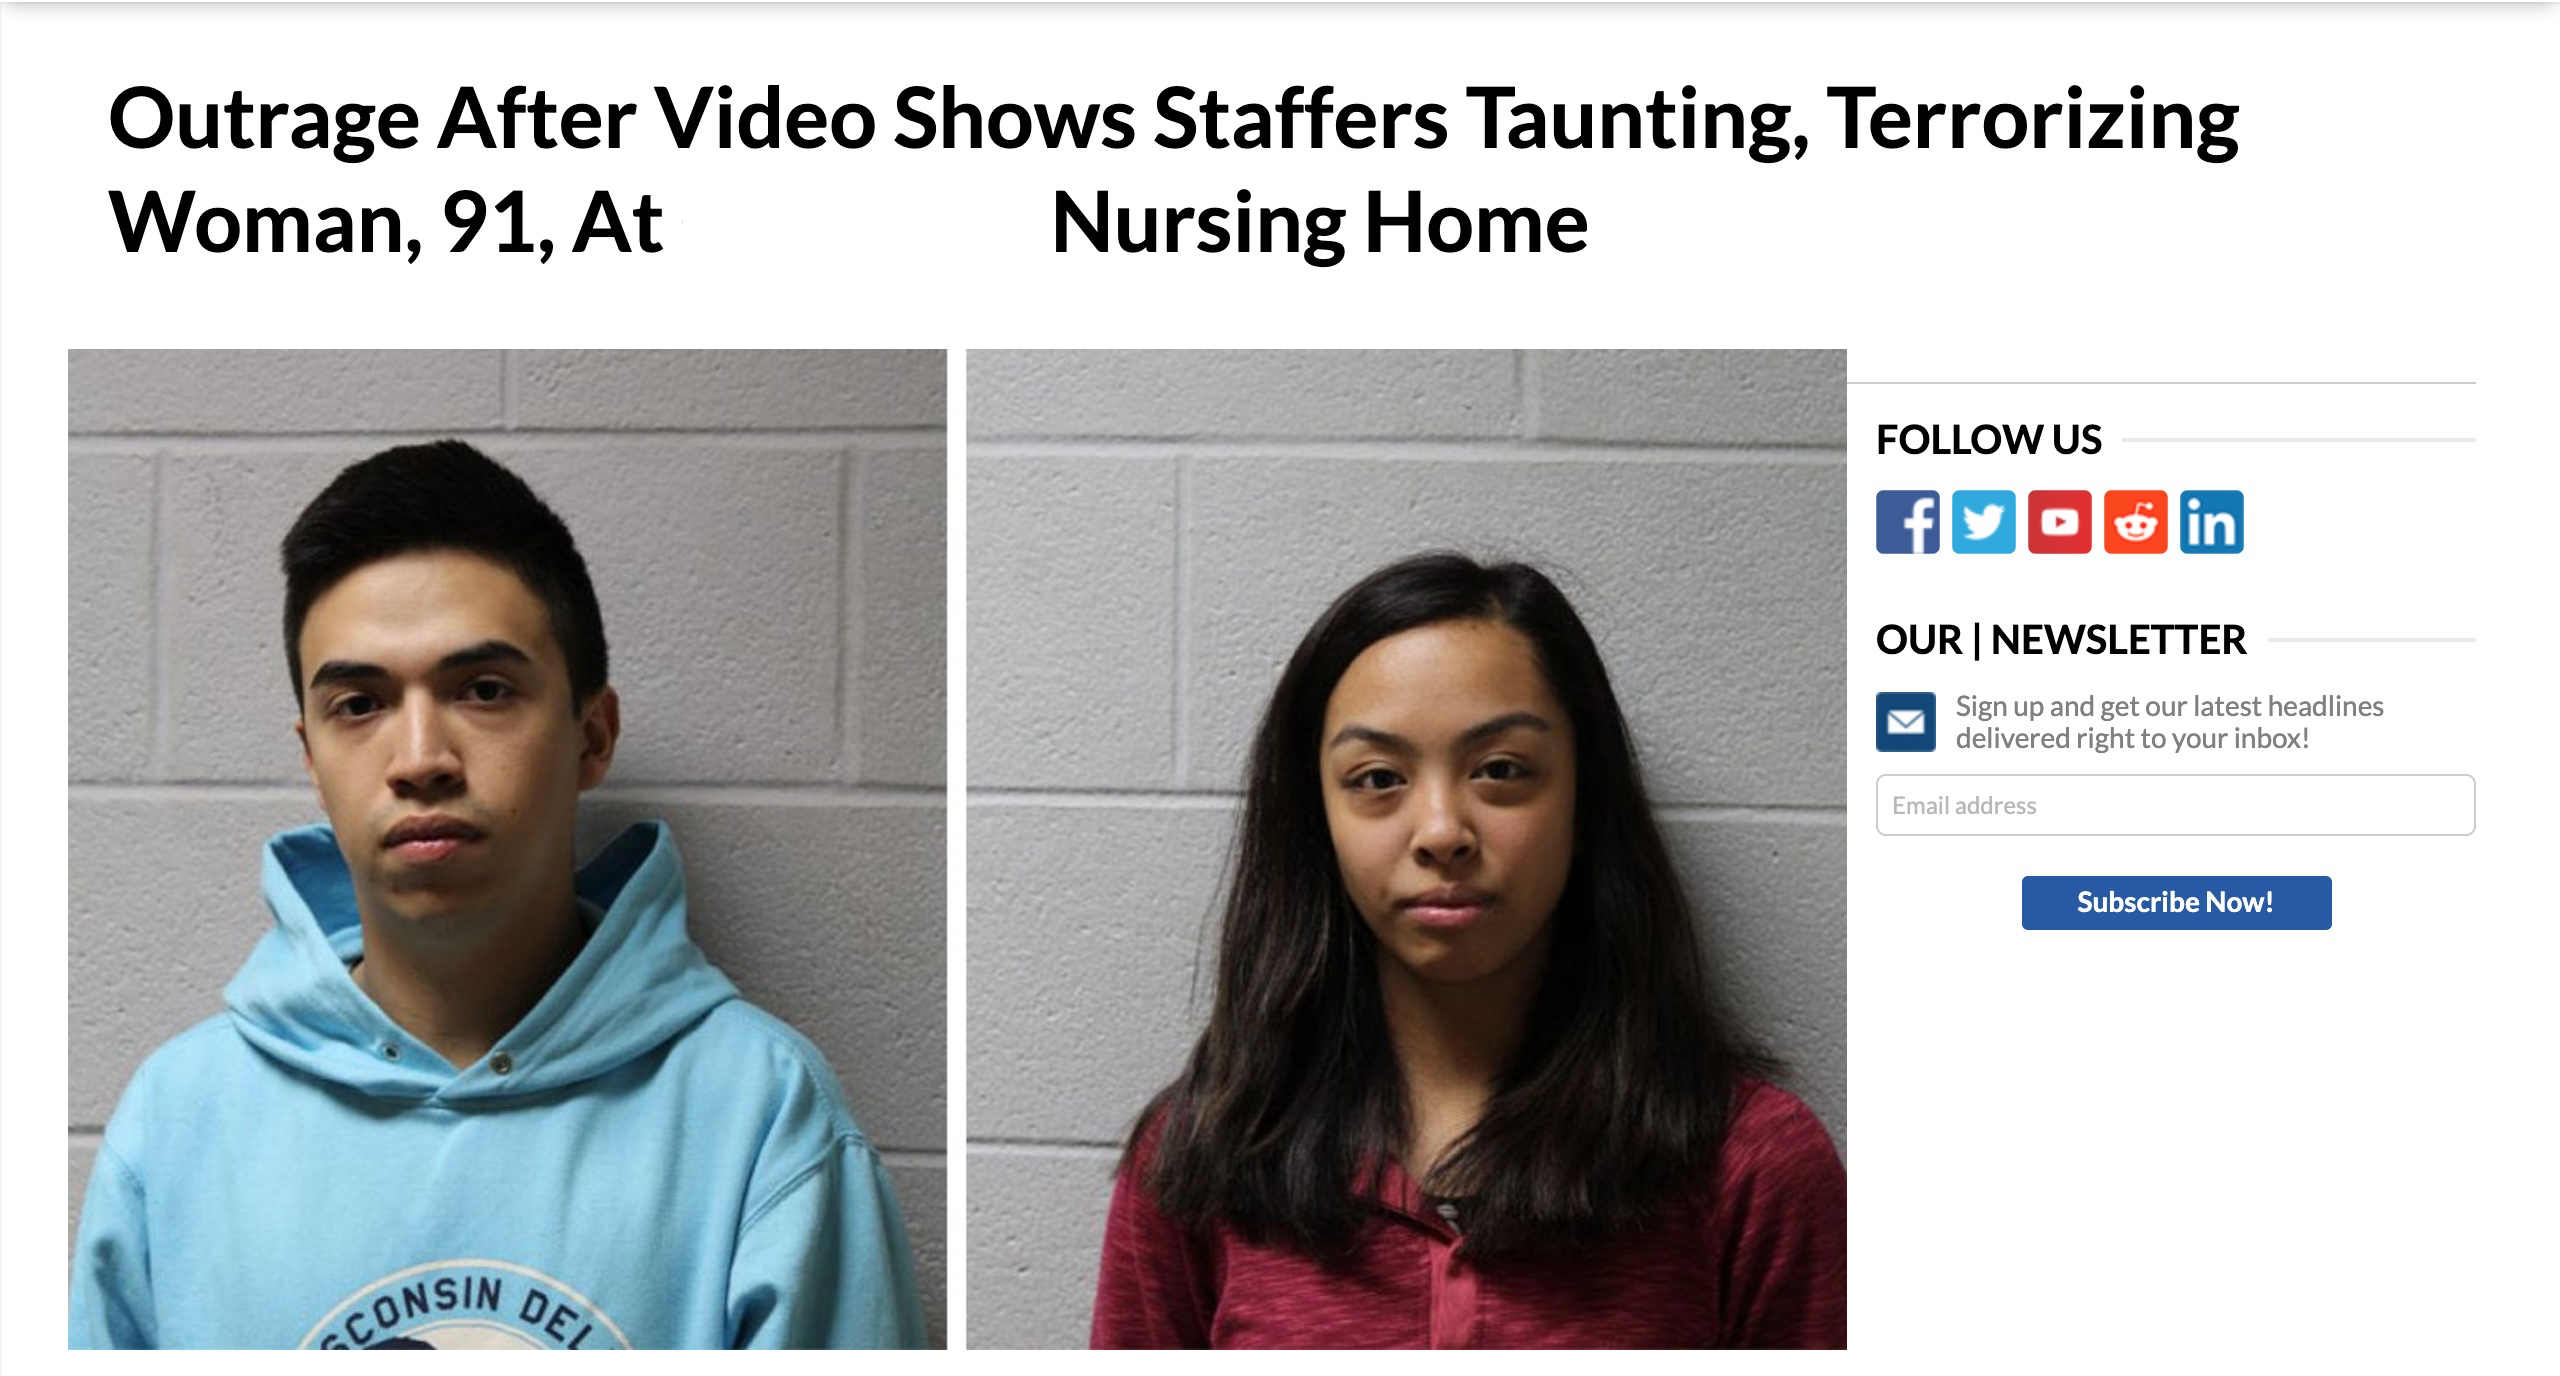 brayan cortez and jamie montesa - Outrage After Video Shows Staffers Taunting, Terrorizing Woman, 91, At Nursing Home Us Our Newsletter Sign up and tour latest headlines vered right to your inbox! Subscribe Now! Consin On